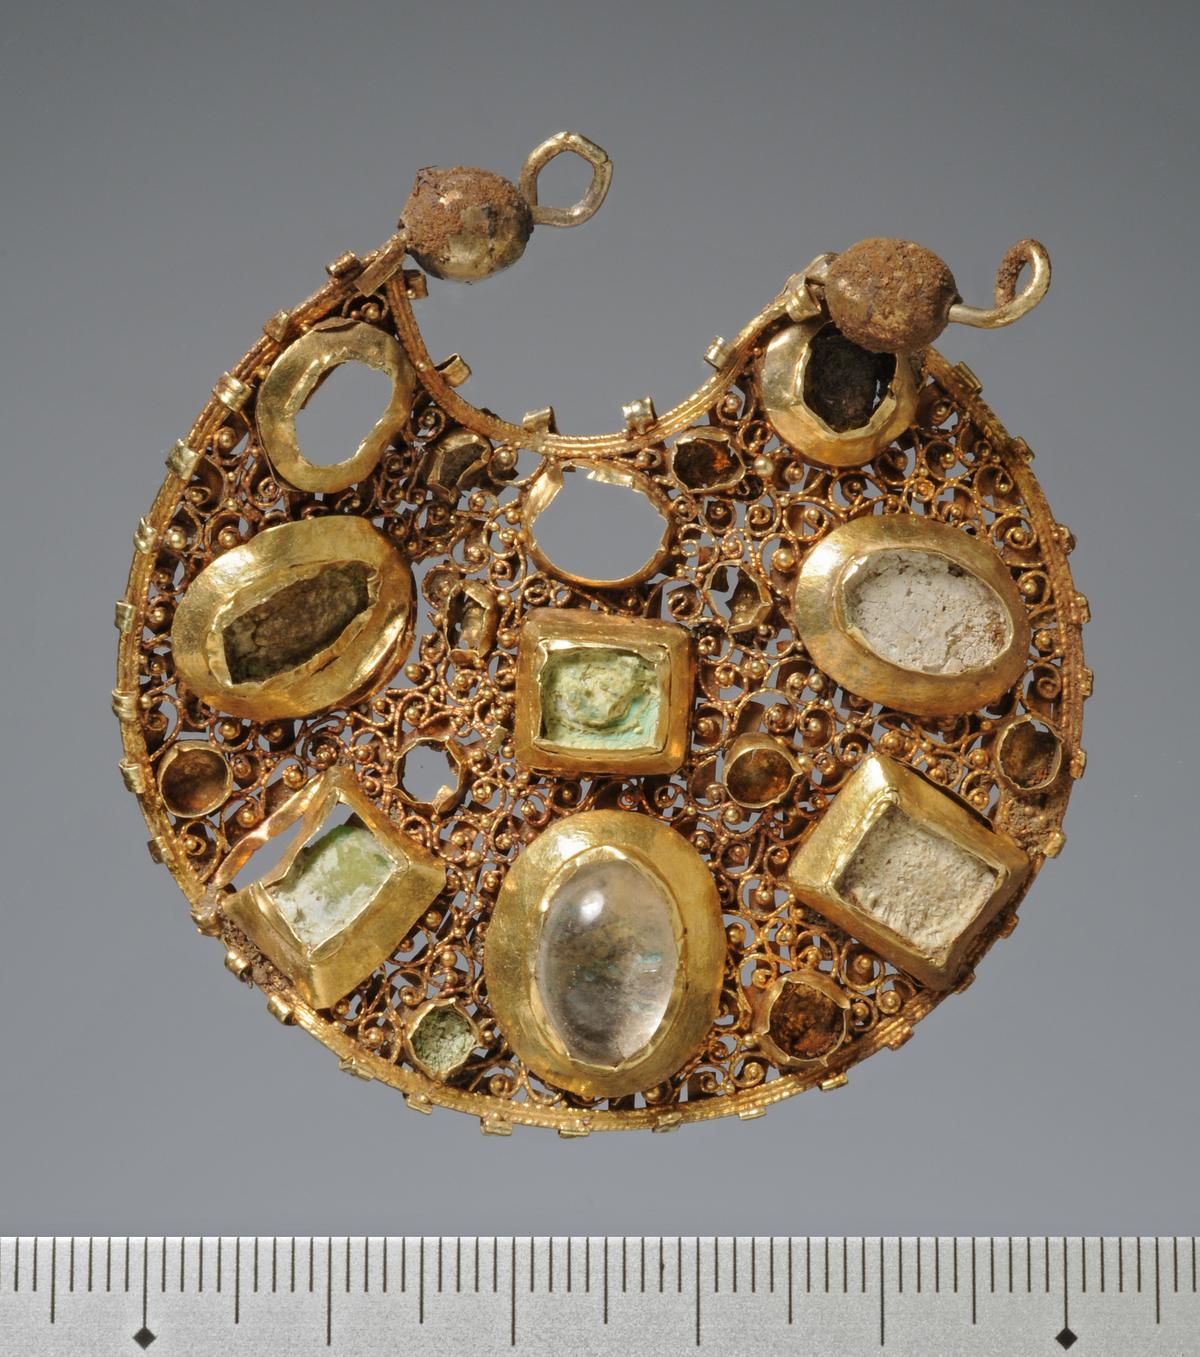 A frontal view of one of the gold earrings. (Courtesy of <a href="http://www.schleswig-holstein.de/">ALSH</a>)